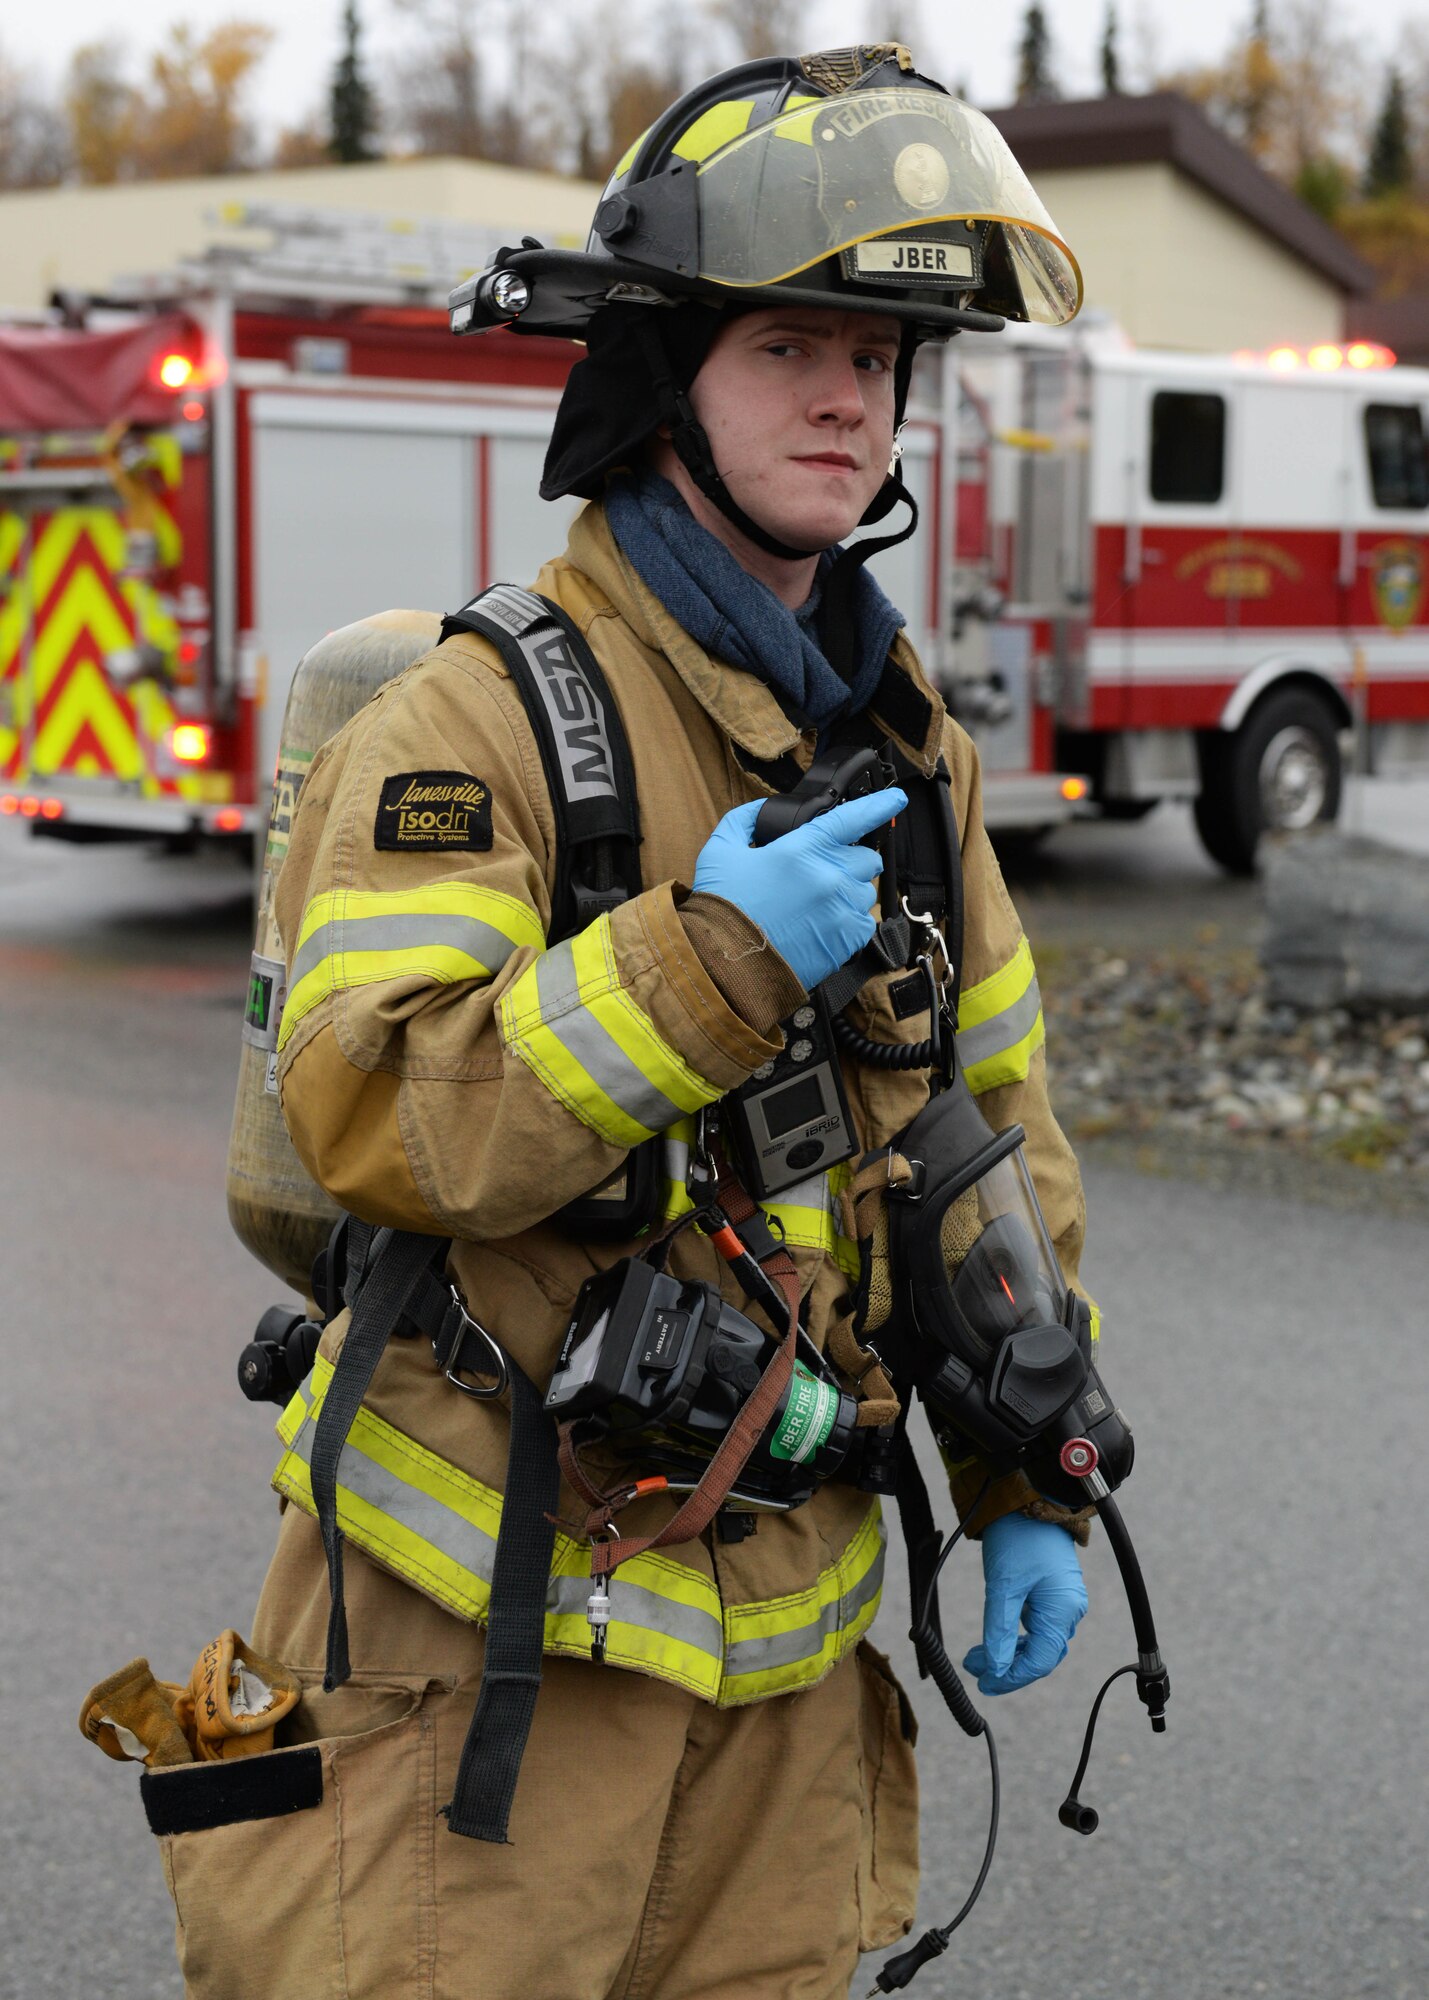 Senior Airman William White, fire protection specialist with the 673d Civil Engineer Squadron participates in a fuel spill exercise Oct. 5, 2017, at Joint Base Elmendorf-Richardson, Alaska. White participated in a fuel spill exercise simulation, which tested the response actions of base recovery agencies in the event of a mass fuel spill, to ensure installation safety and minimal environmental impact.